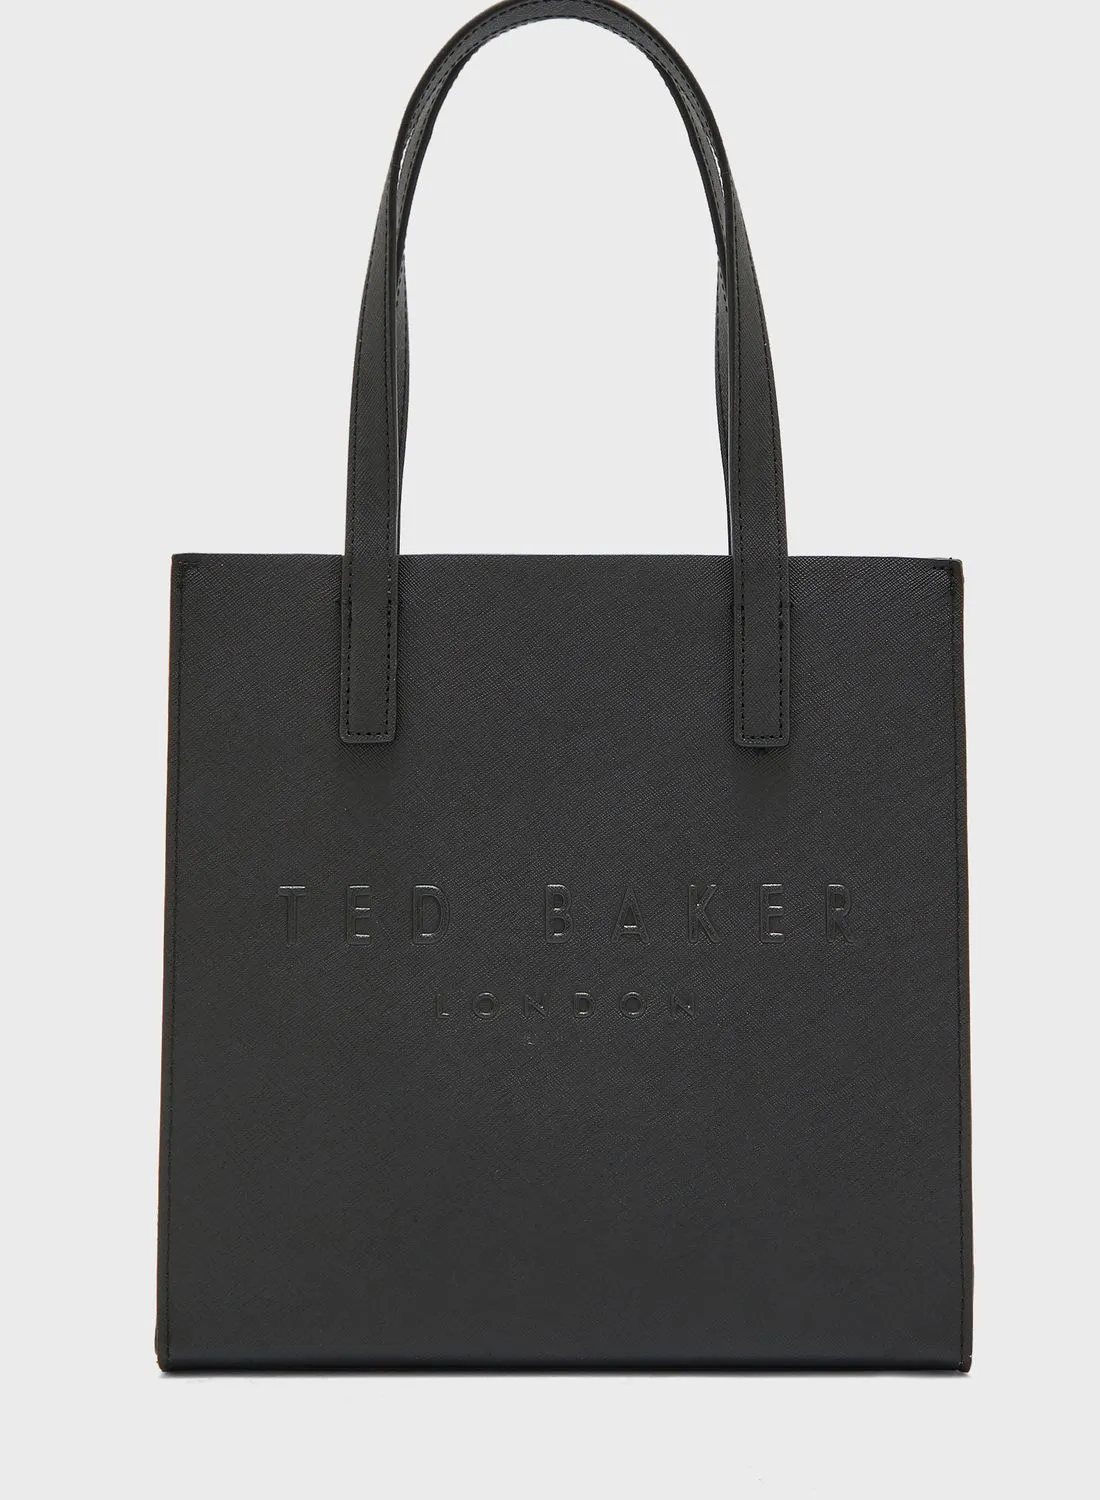 Ted Baker Seacon Crosshatch Tote Bag